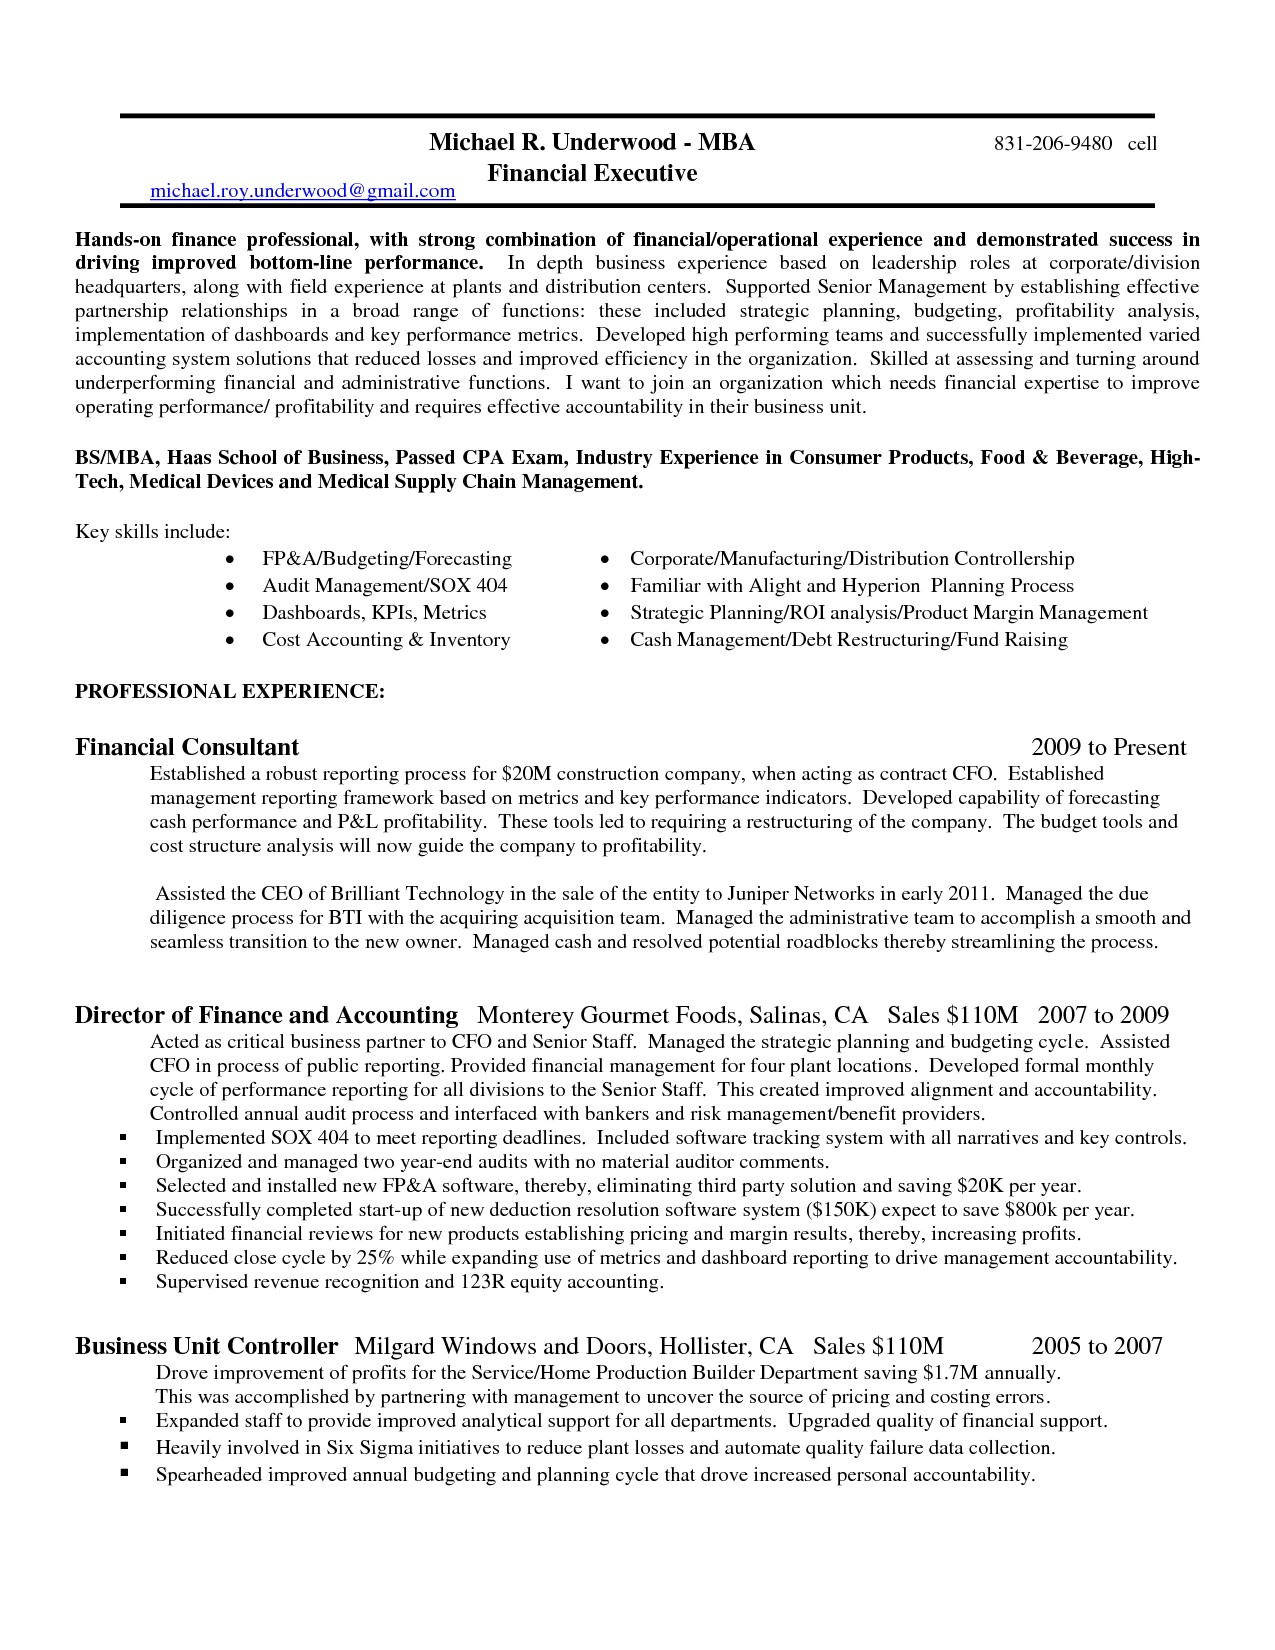 Reliance Letter Due Diligence Template - Cfo Resume Executive Summary Cfo Resume Examples Cfo Sample Chief